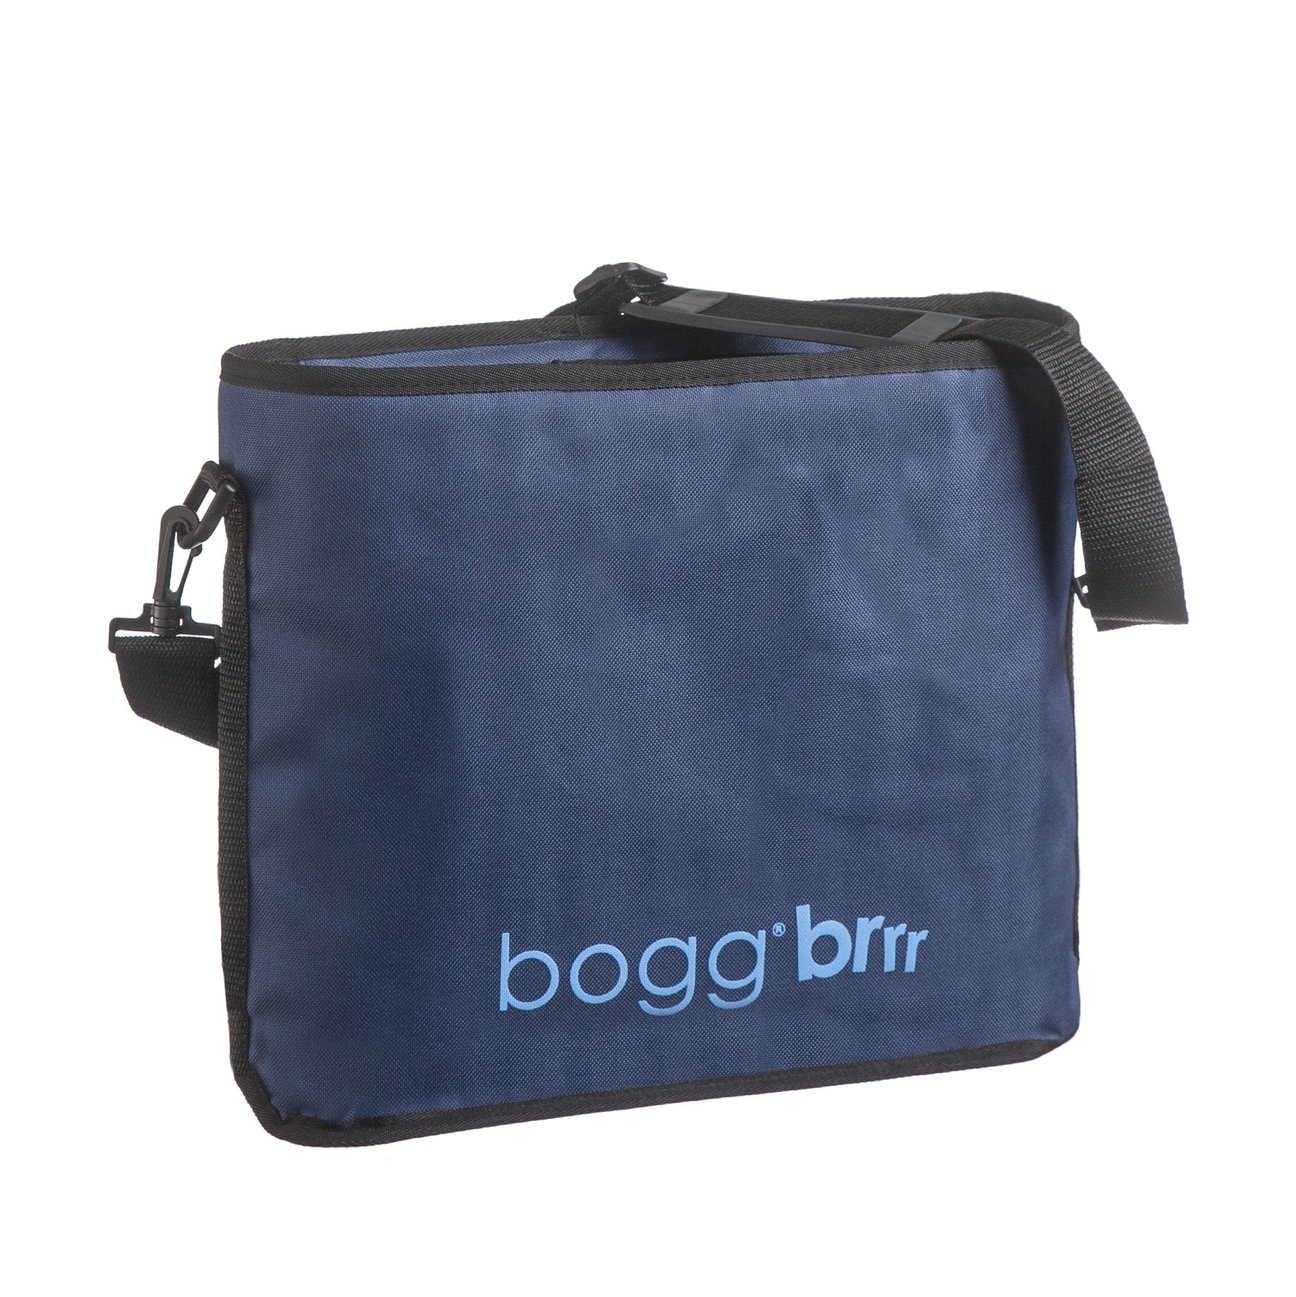 BOGG, Baby Bogg One Year Later Review & Packing Video!